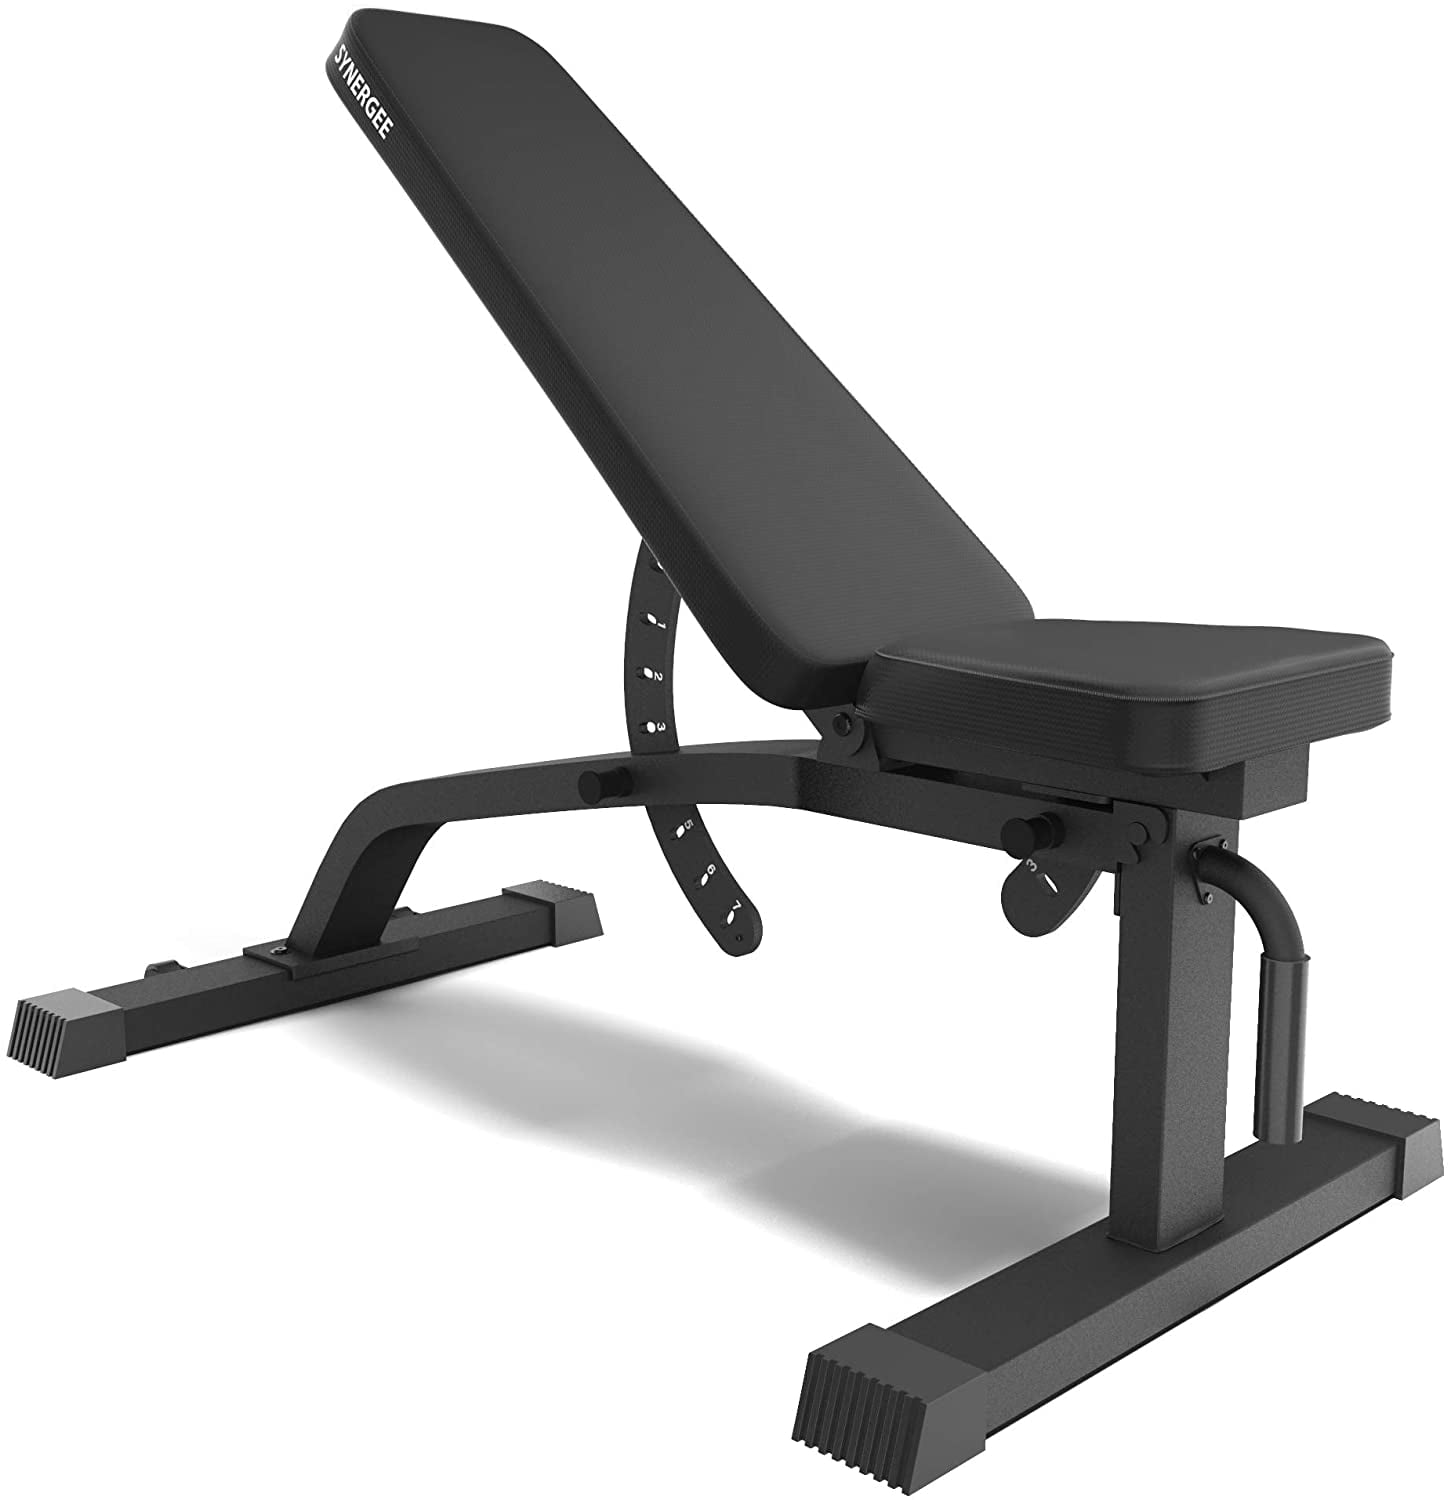 Synergee Adjustable Incline Decline Workout Bench – Weight Bench for